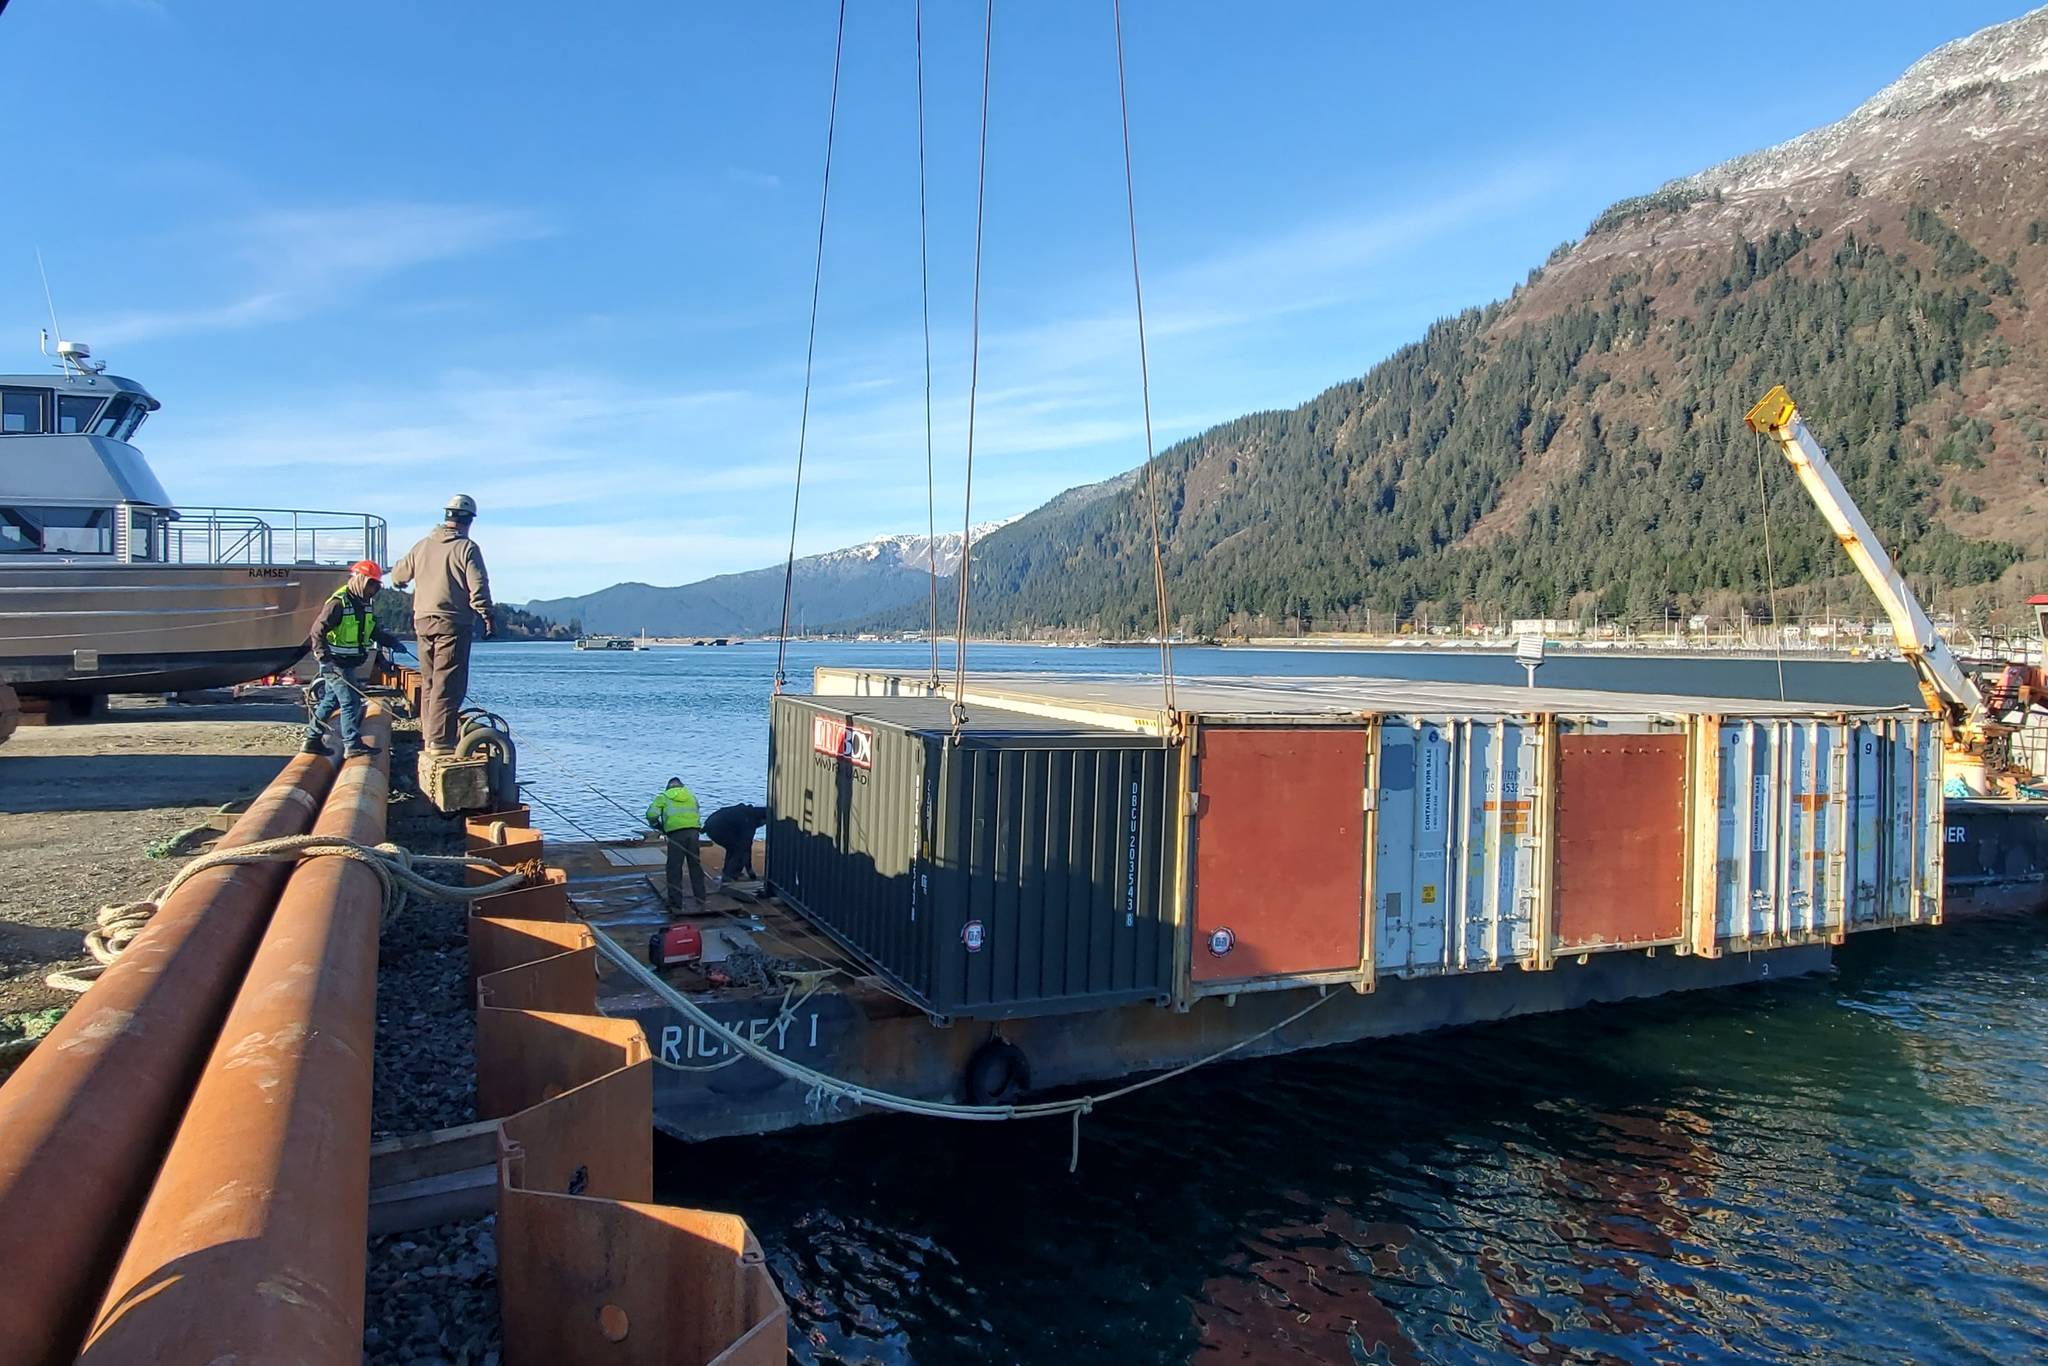 The Biden administration says it wants to strengthen ties with tribal governments like Central Council of Tlingit & Haida Indian Tribes of Alaska, whose workers are seen here loading shipping containers full of supplies bound for needy communities in Southeast Alaska onto a barge in the Gastineau Channel on Oct. 21, 2020. (Courtesy photo / Central Council of Tlingit & Haida Indian Tribes of Alaska)